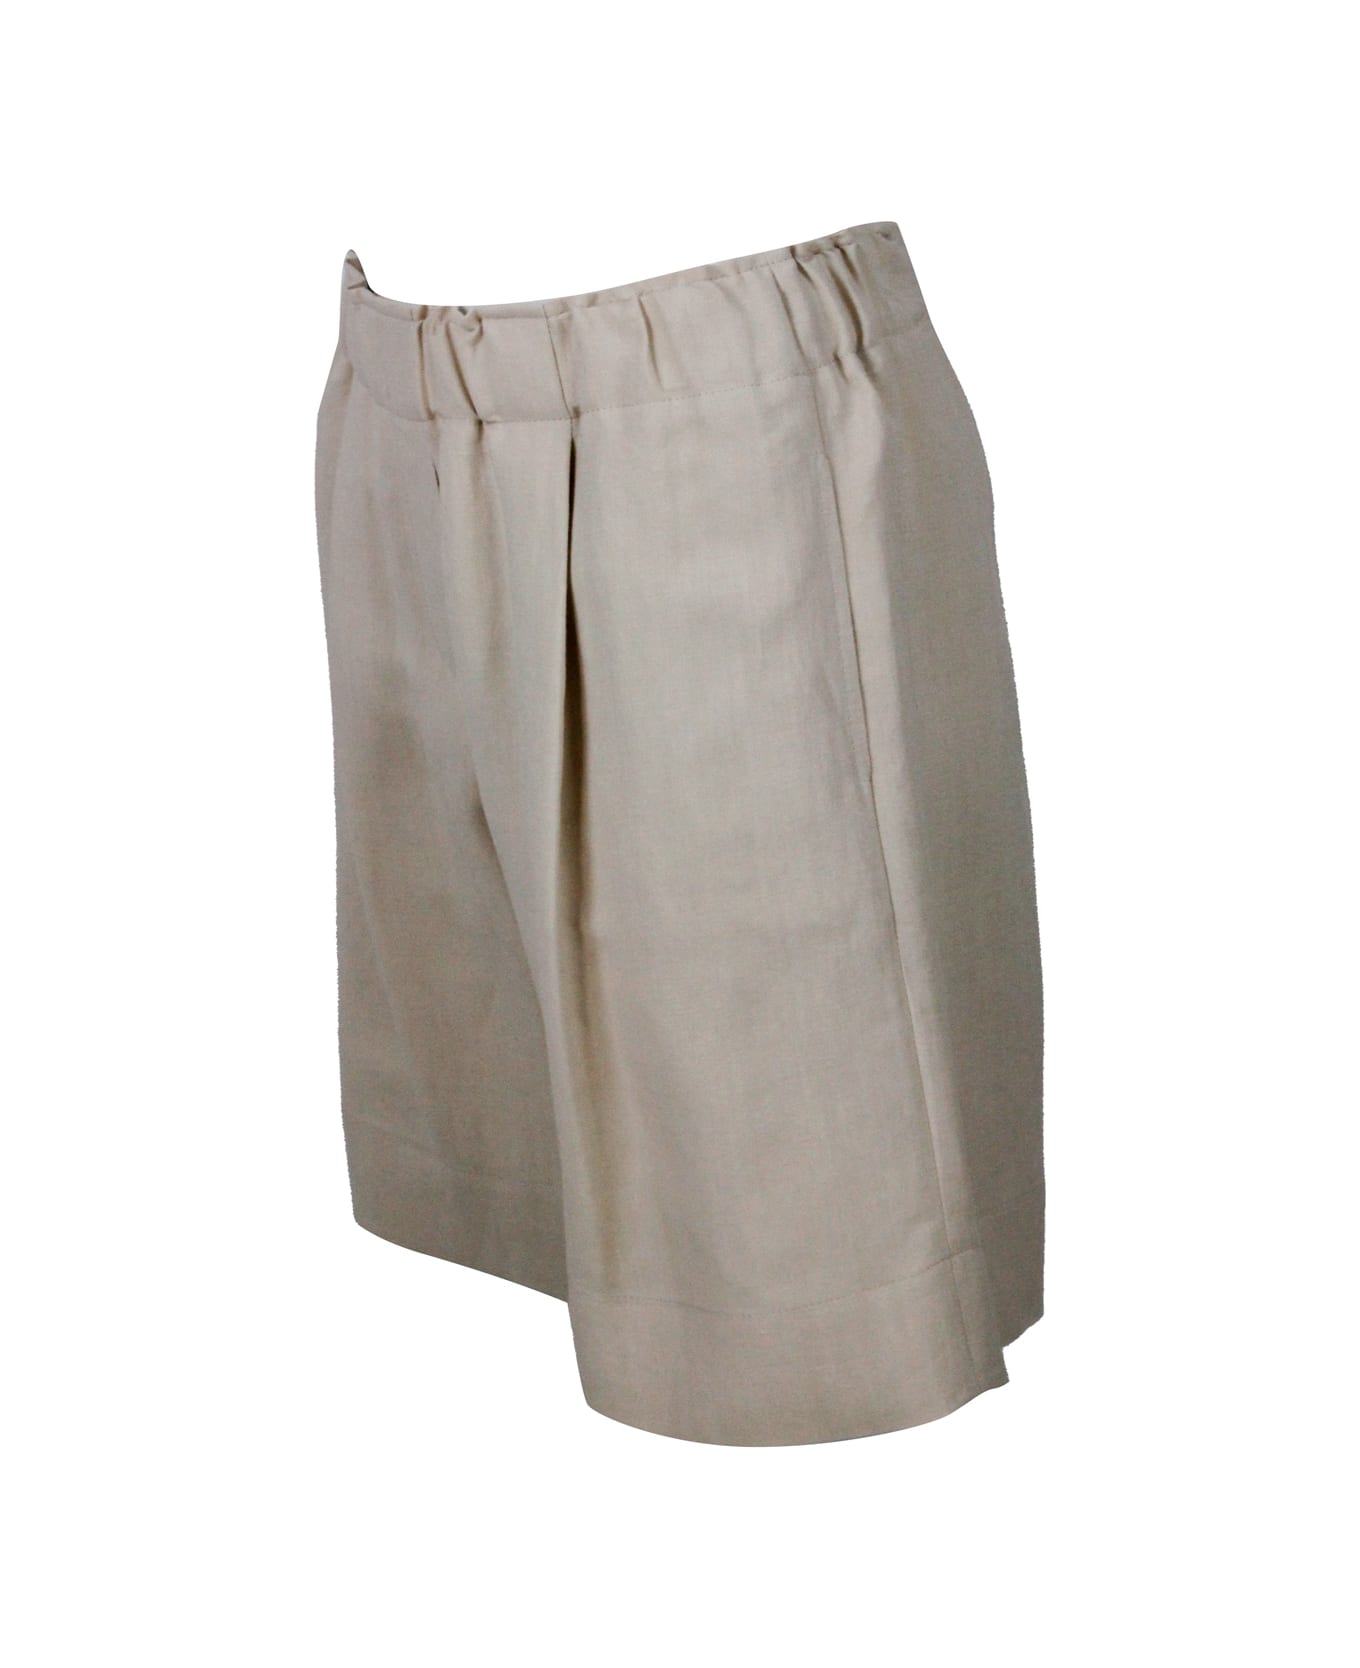 Antonelli Knee-length Bermuda Shorts In Linen Blend With Small Darts And Elasticated Waist - Beige ショートパンツ